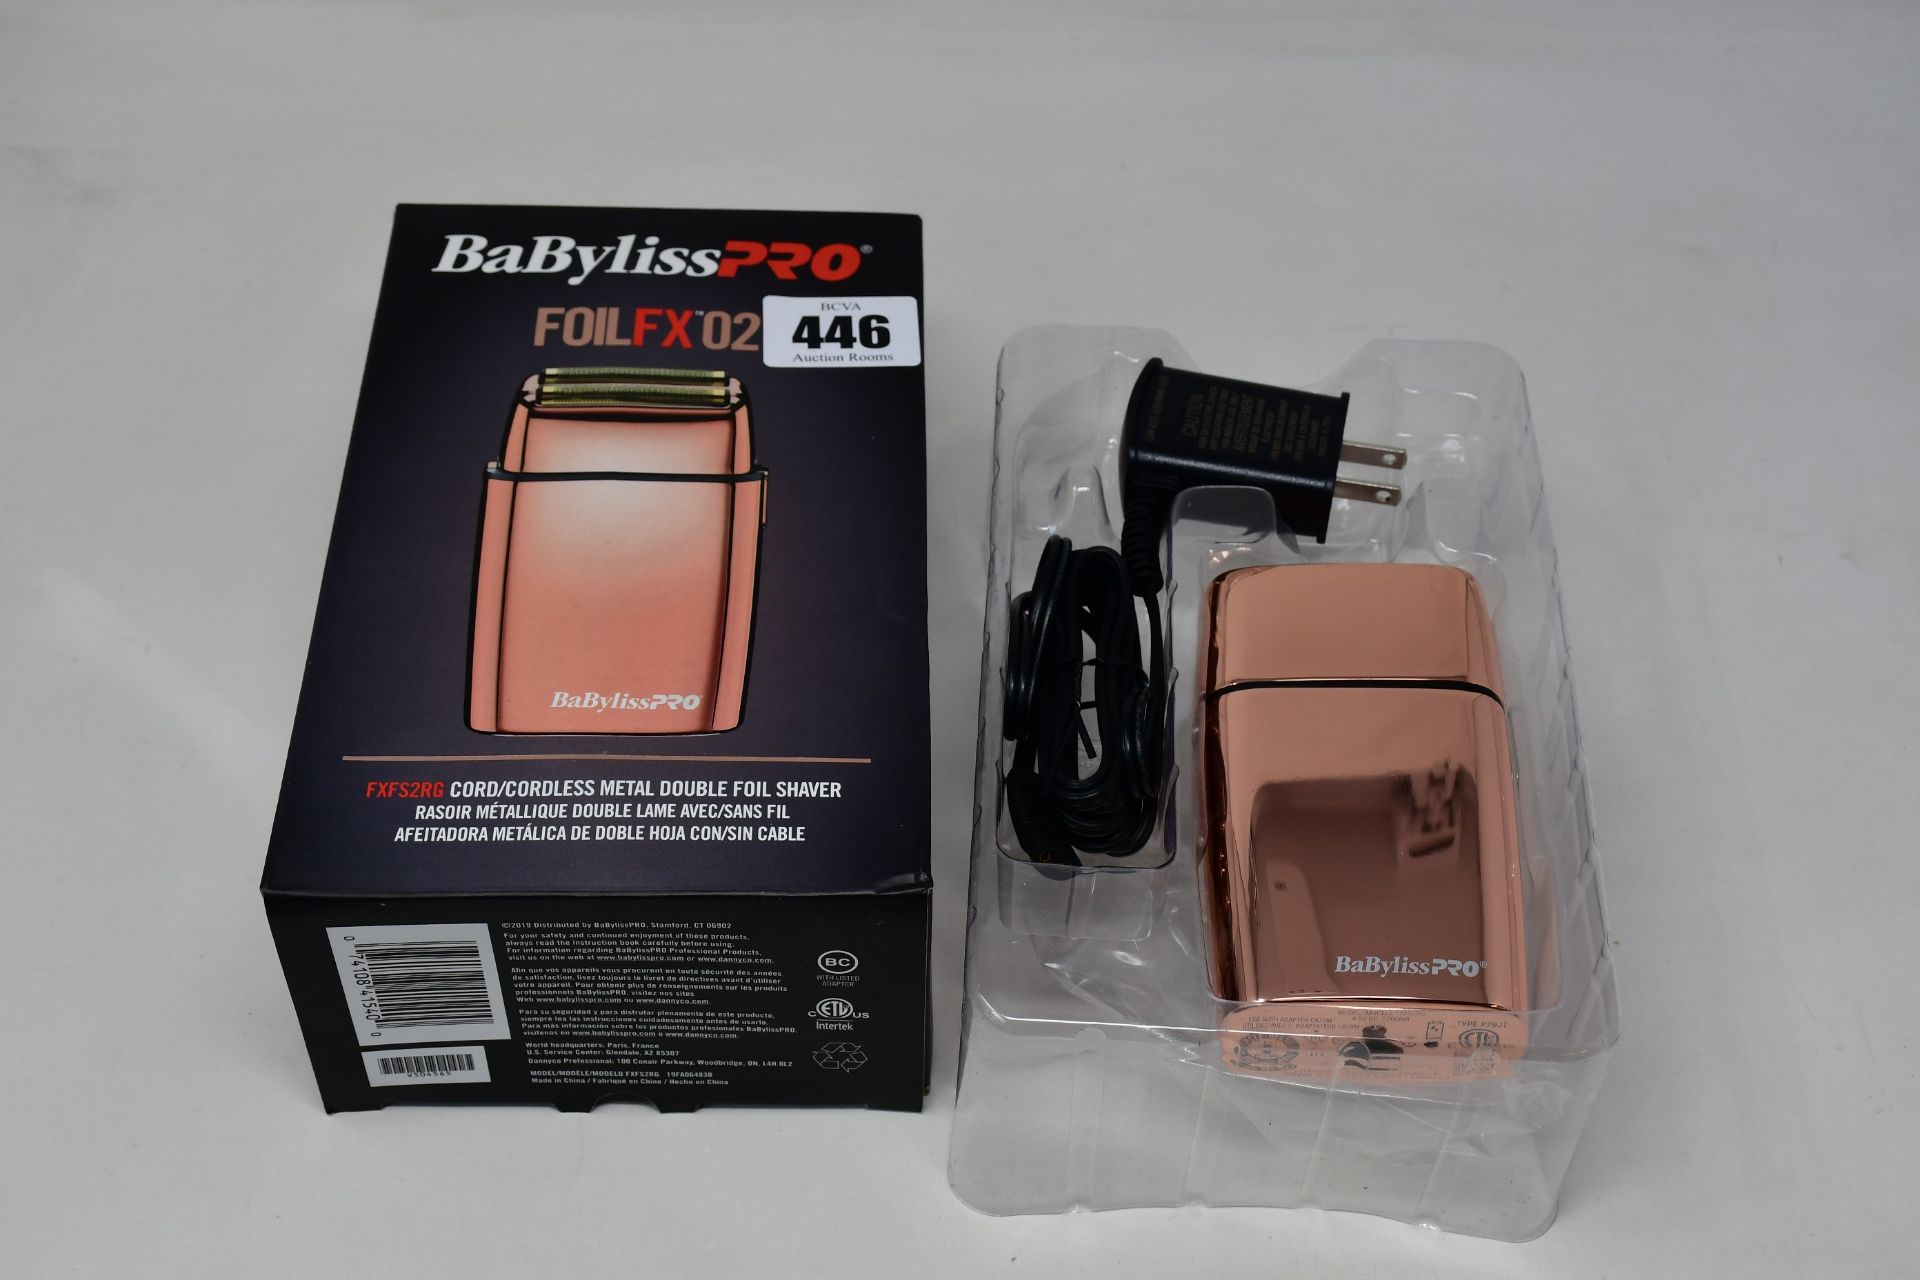 A boxed Babyliss PRO FoilFX02 double foil shaver (May require UK adaptor, some attachments may be